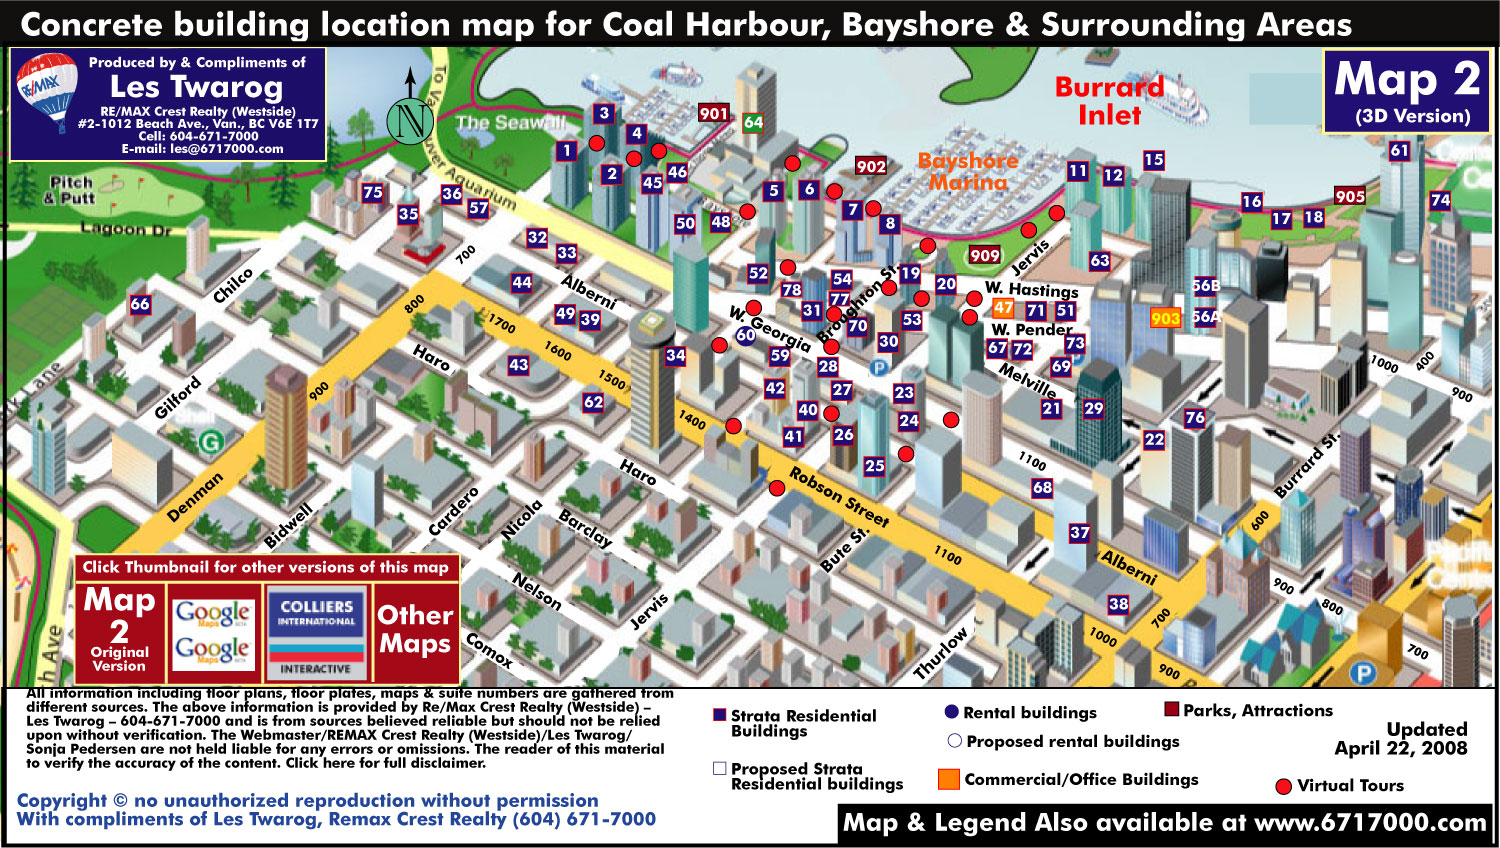 Detailed Interactive Downtown Vancouver Building Location Maps with Individual Building Listings & Sale History Including Rentals for MAP 2 - Coal Harbour, Bayshore Area & Part of Westend - 3d Map